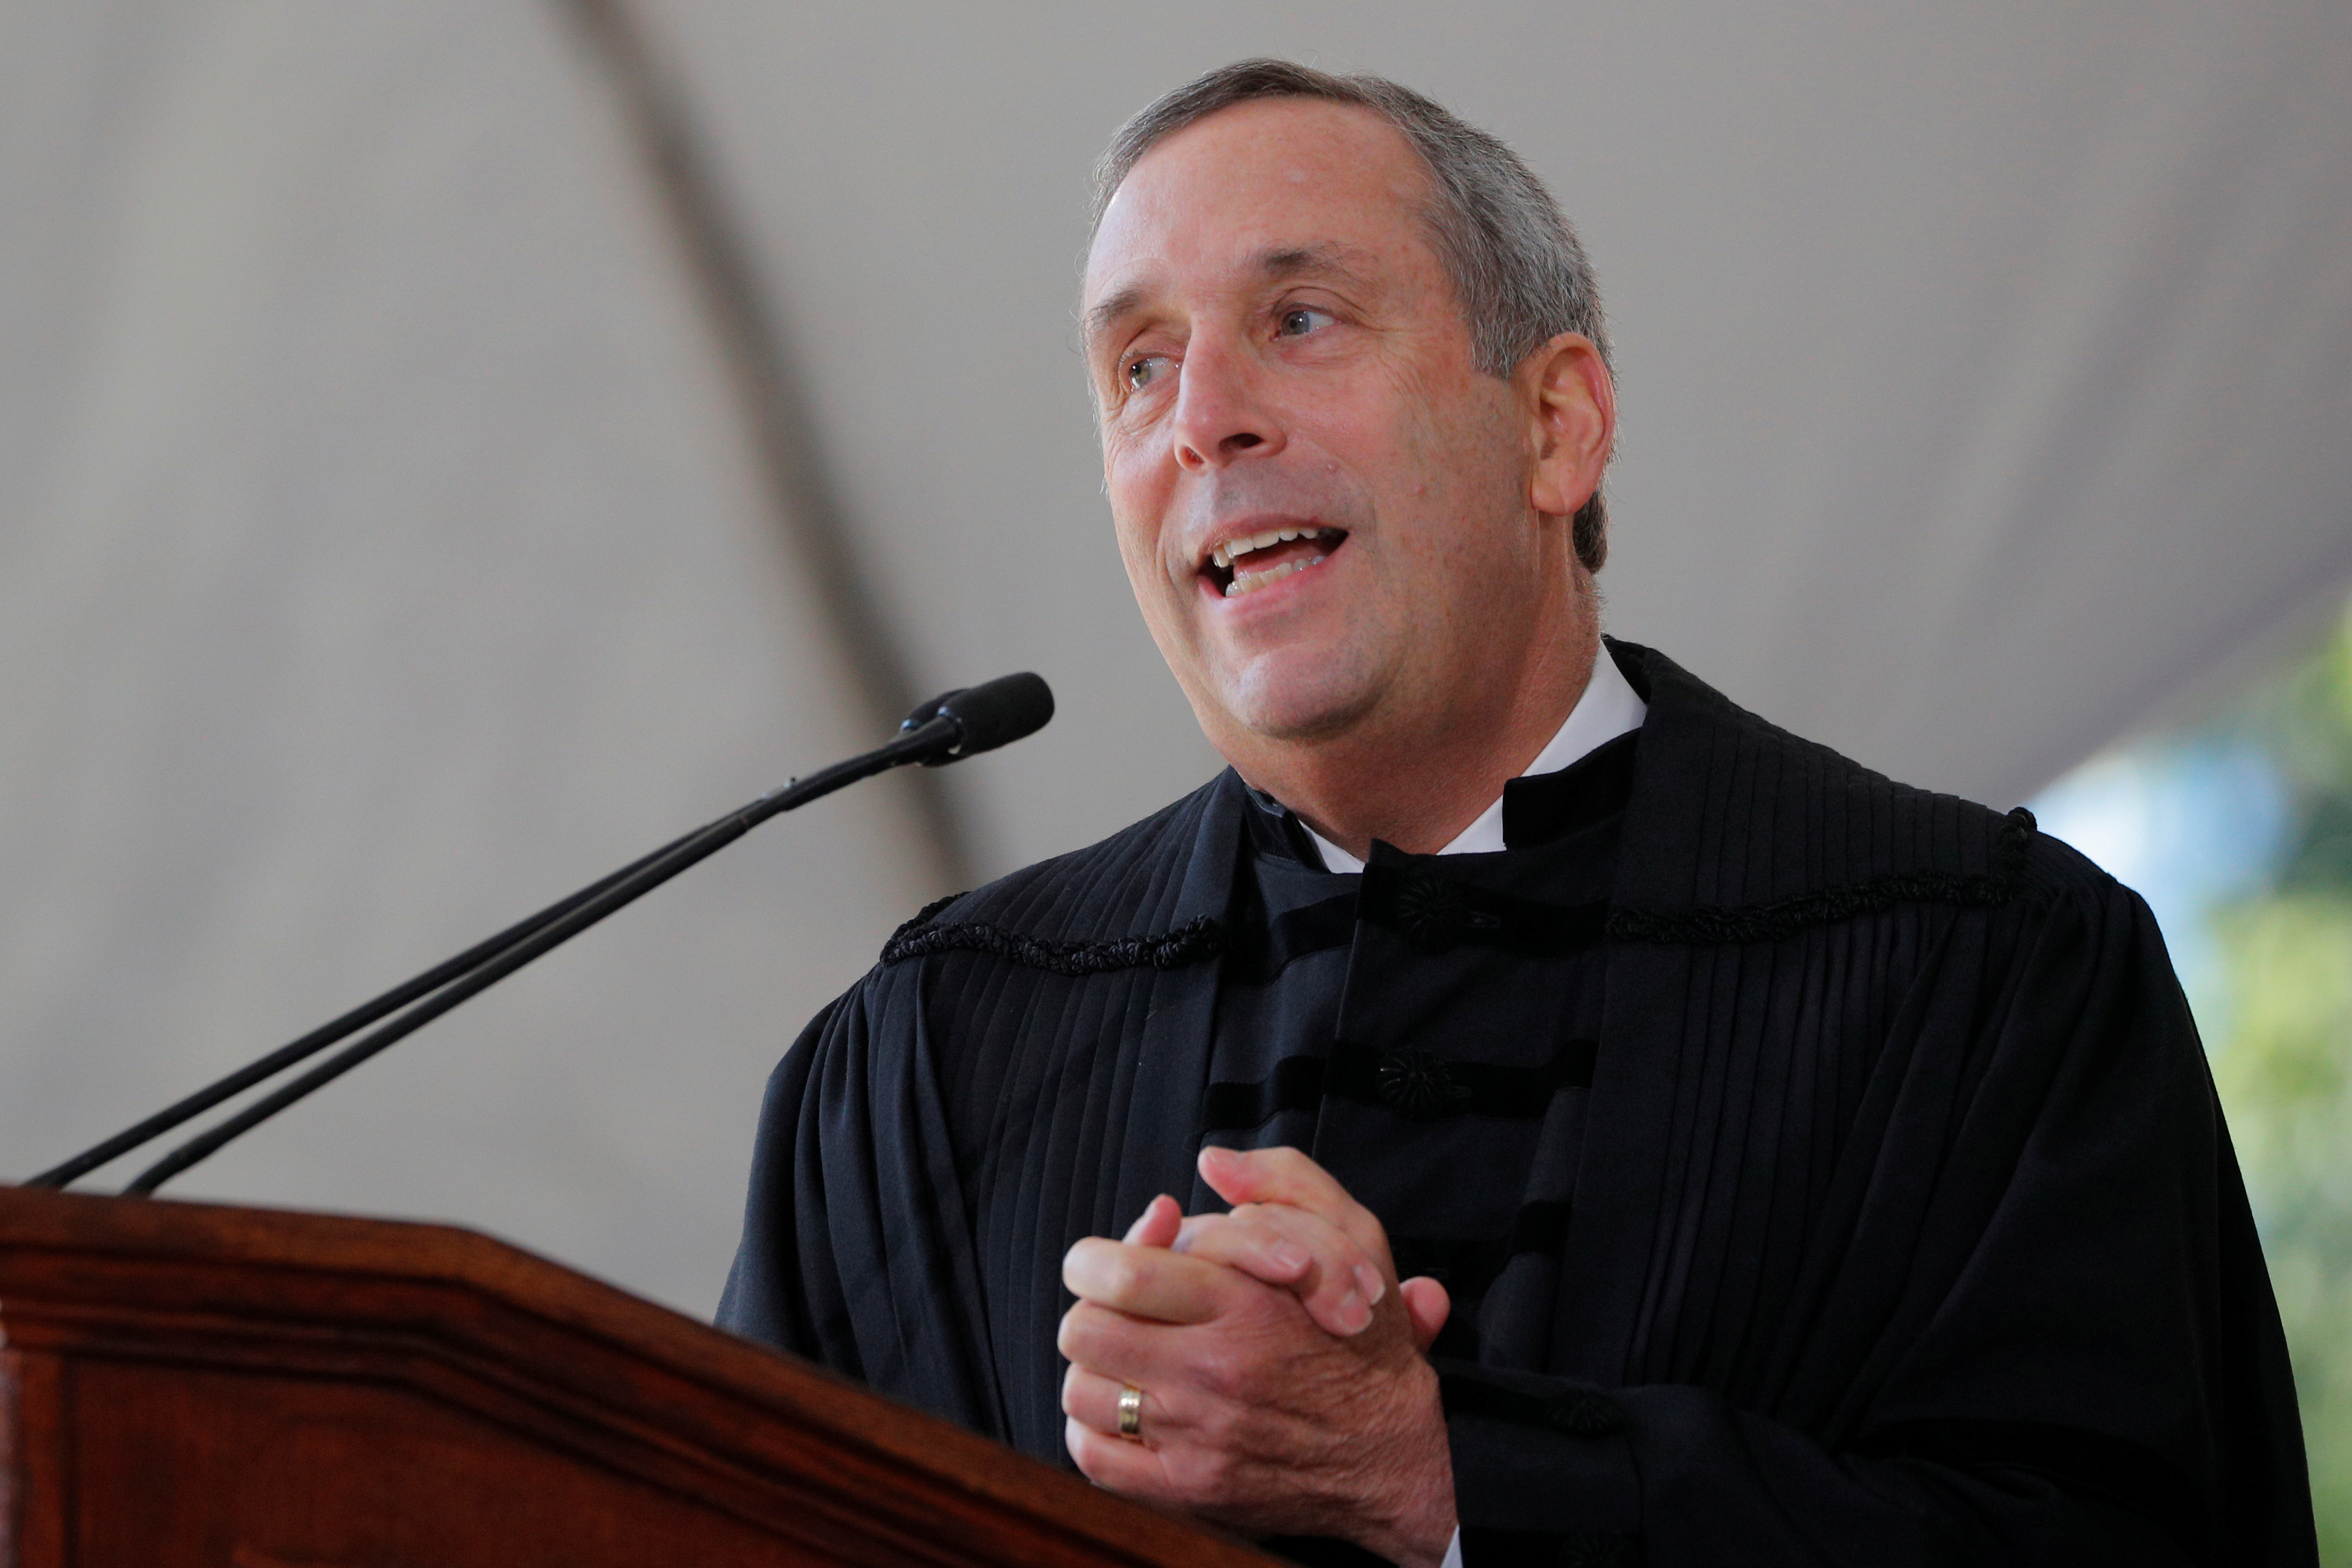 Lawrence Bacow speaks during his inauguration as the 29th President of Harvard University in Cambridge